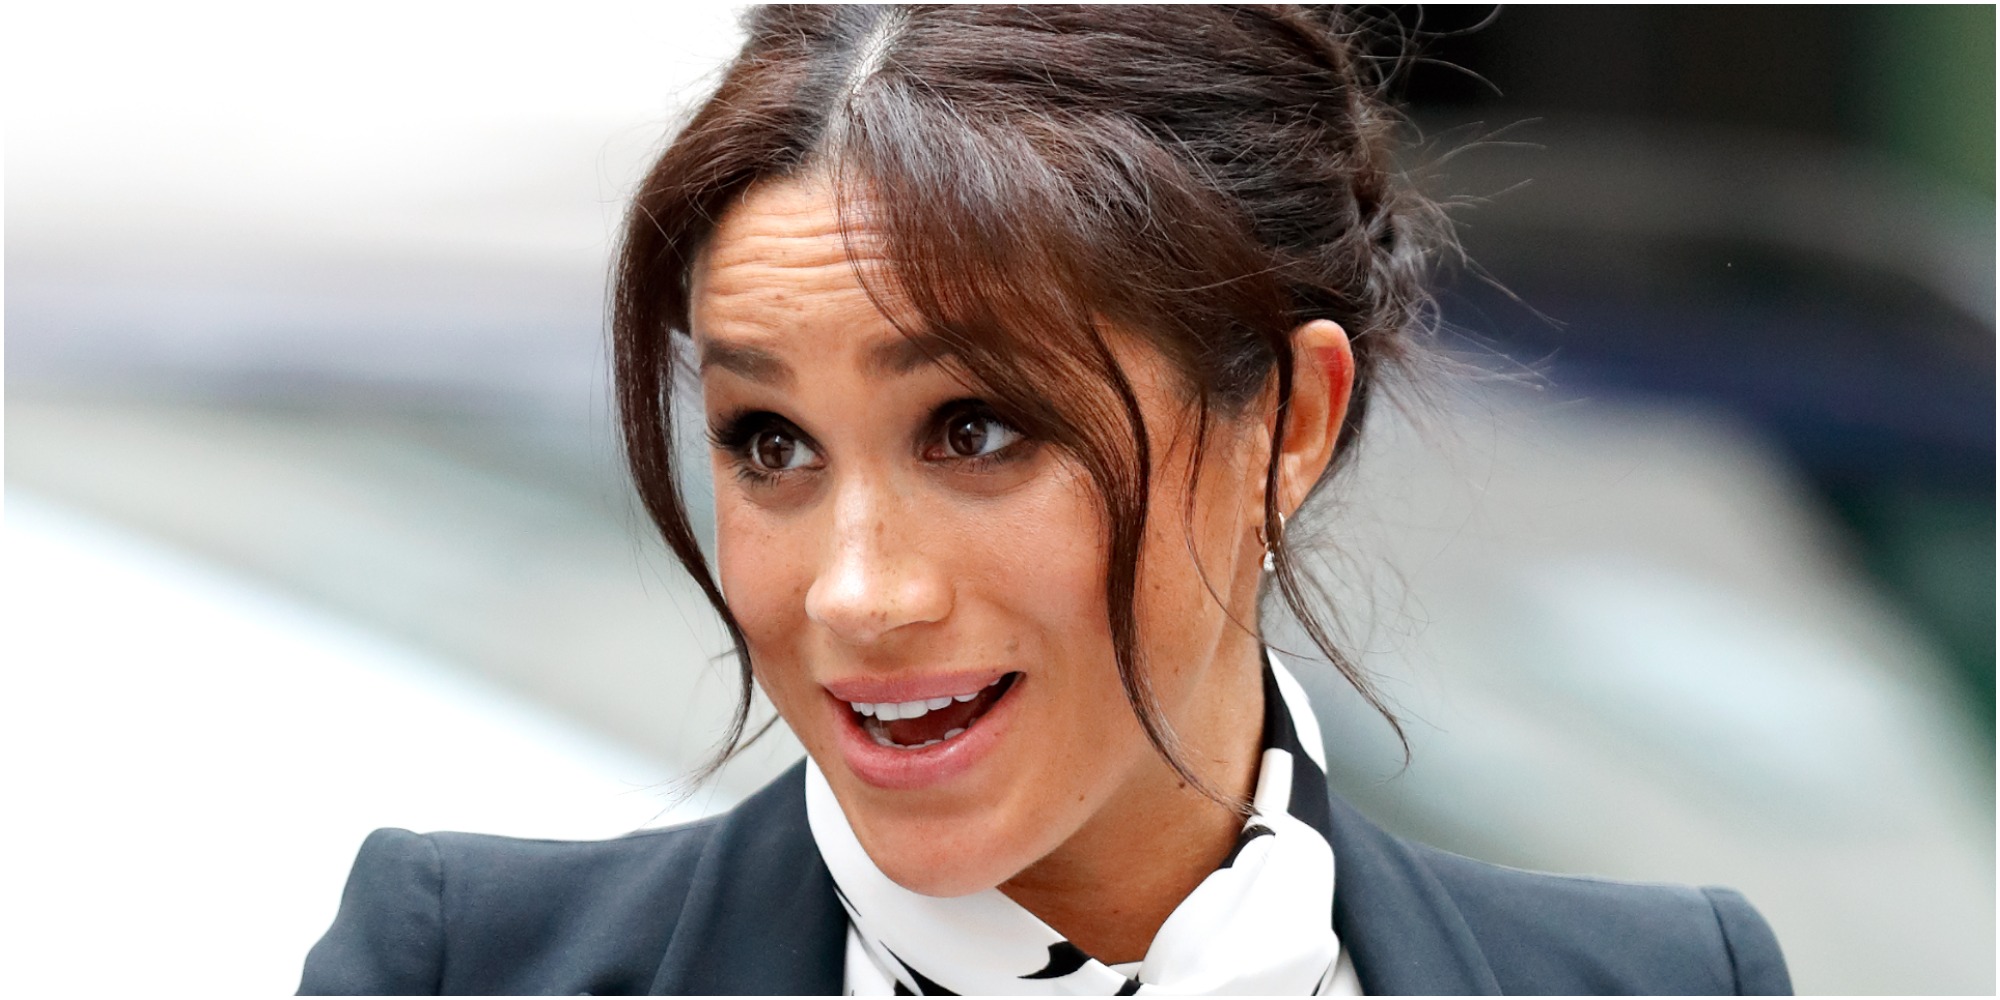 Meghan Markle poses for a red carpet photograph with her hair tied away from her face.